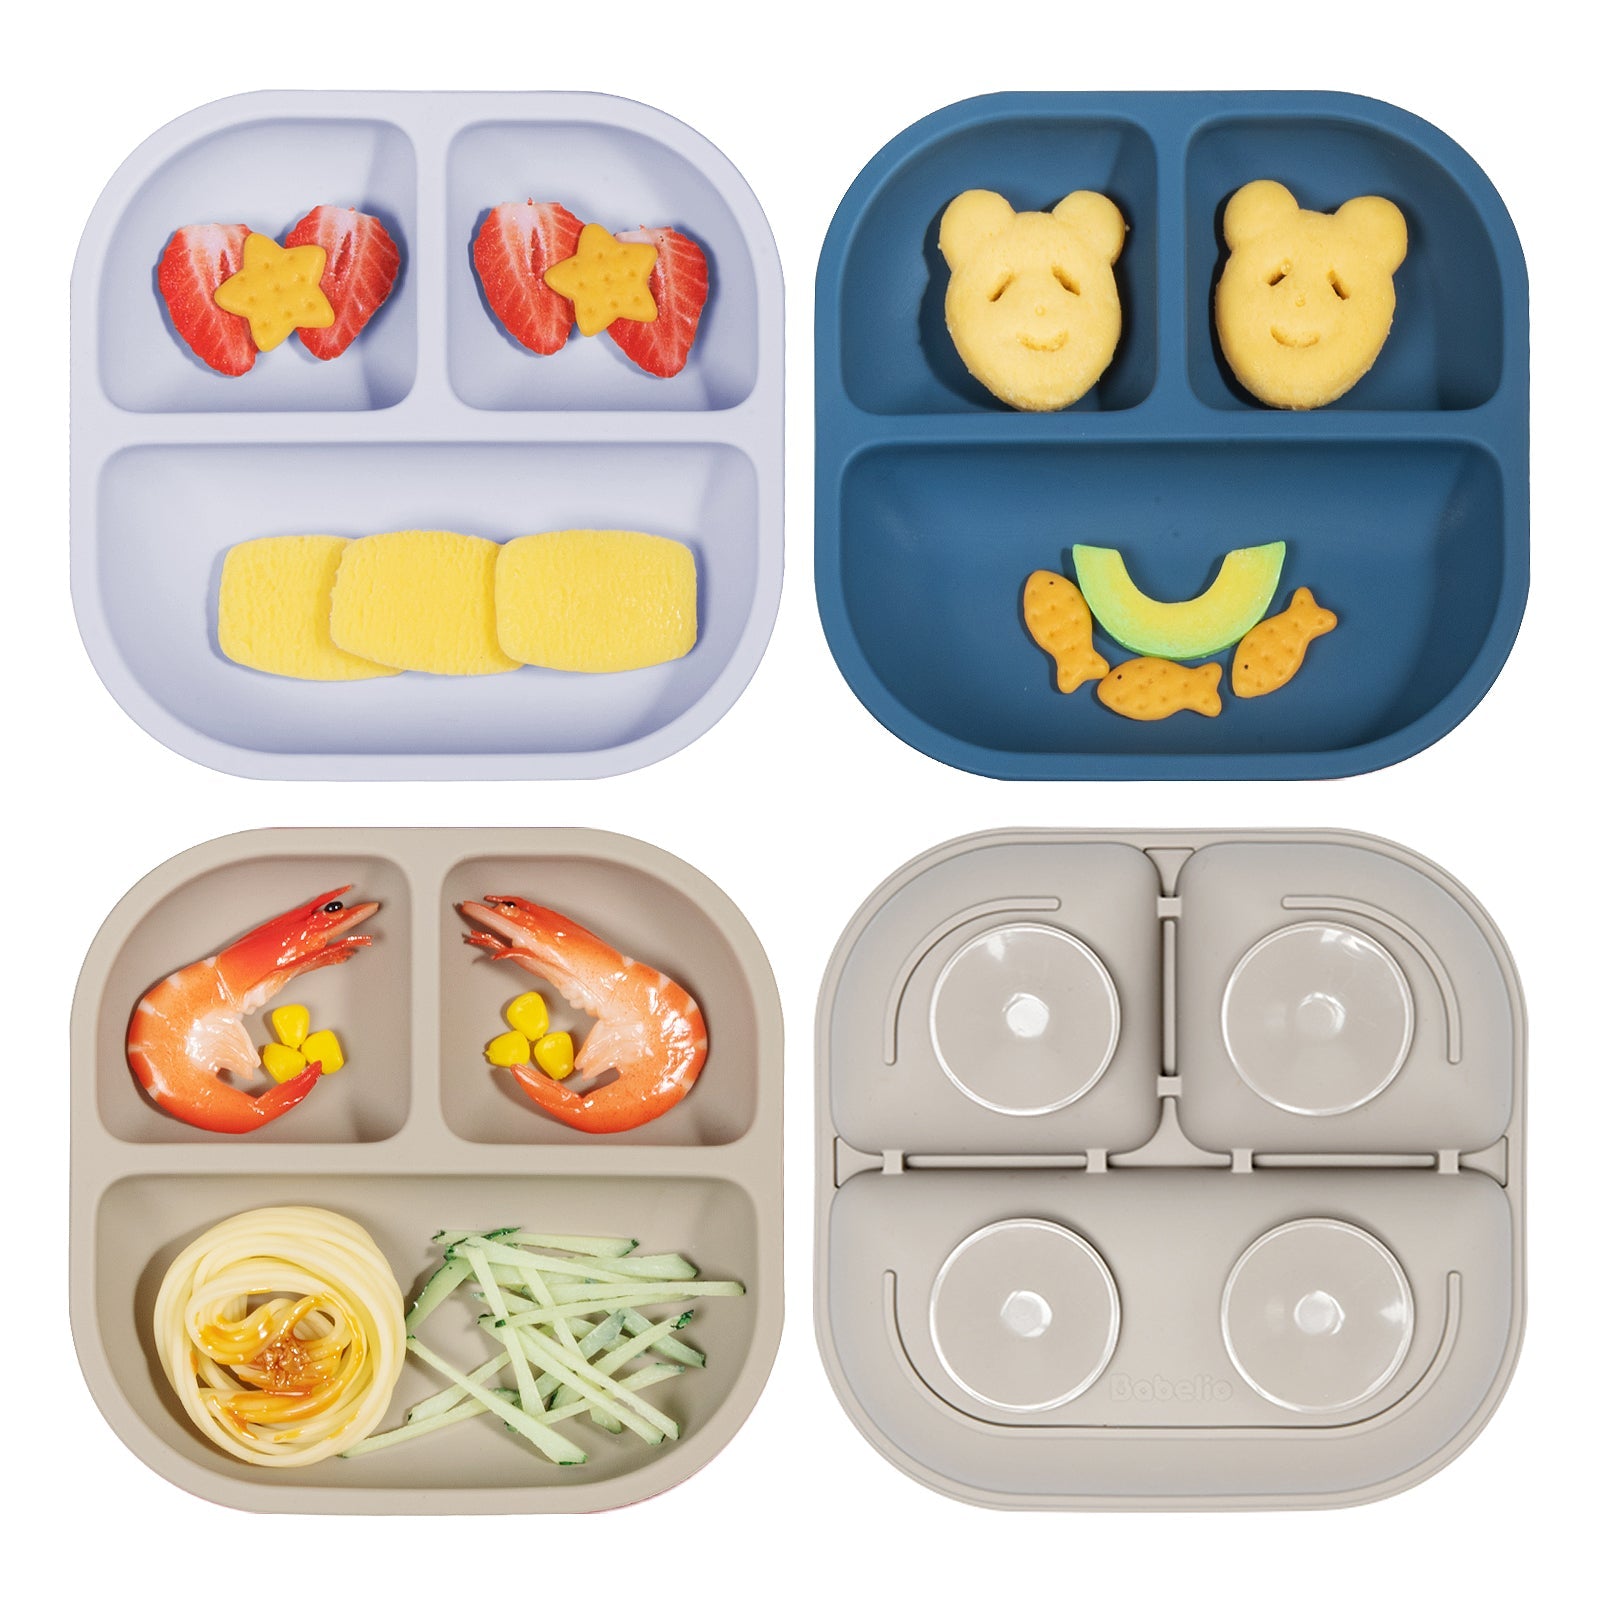 4pcs Travel Suction Plate for Baby, Portable Silicone Suction Plate to Go  Set for Toddler, Baby Divided Bowls with Utensils Compact Design for Travel